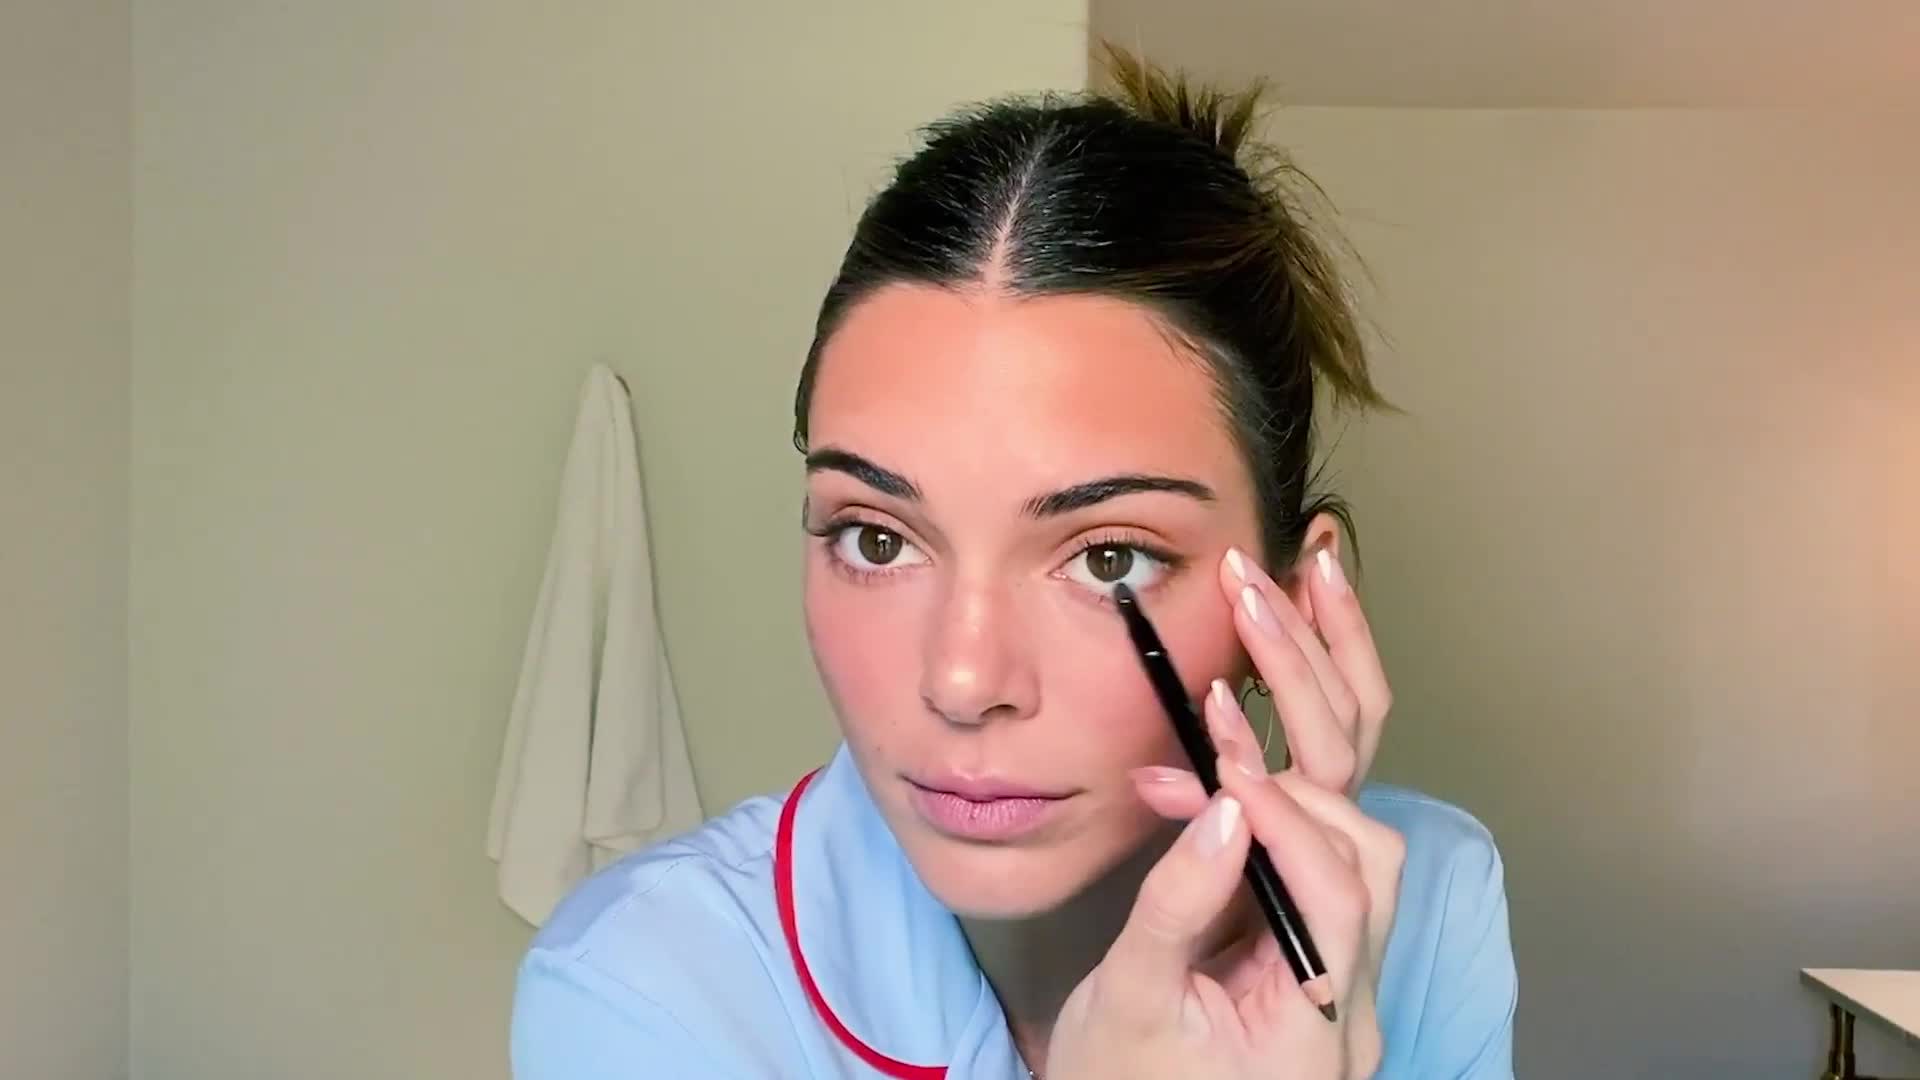 I've Seen All Of Vogue's Beauty Secrets Videos - Here Are the 10